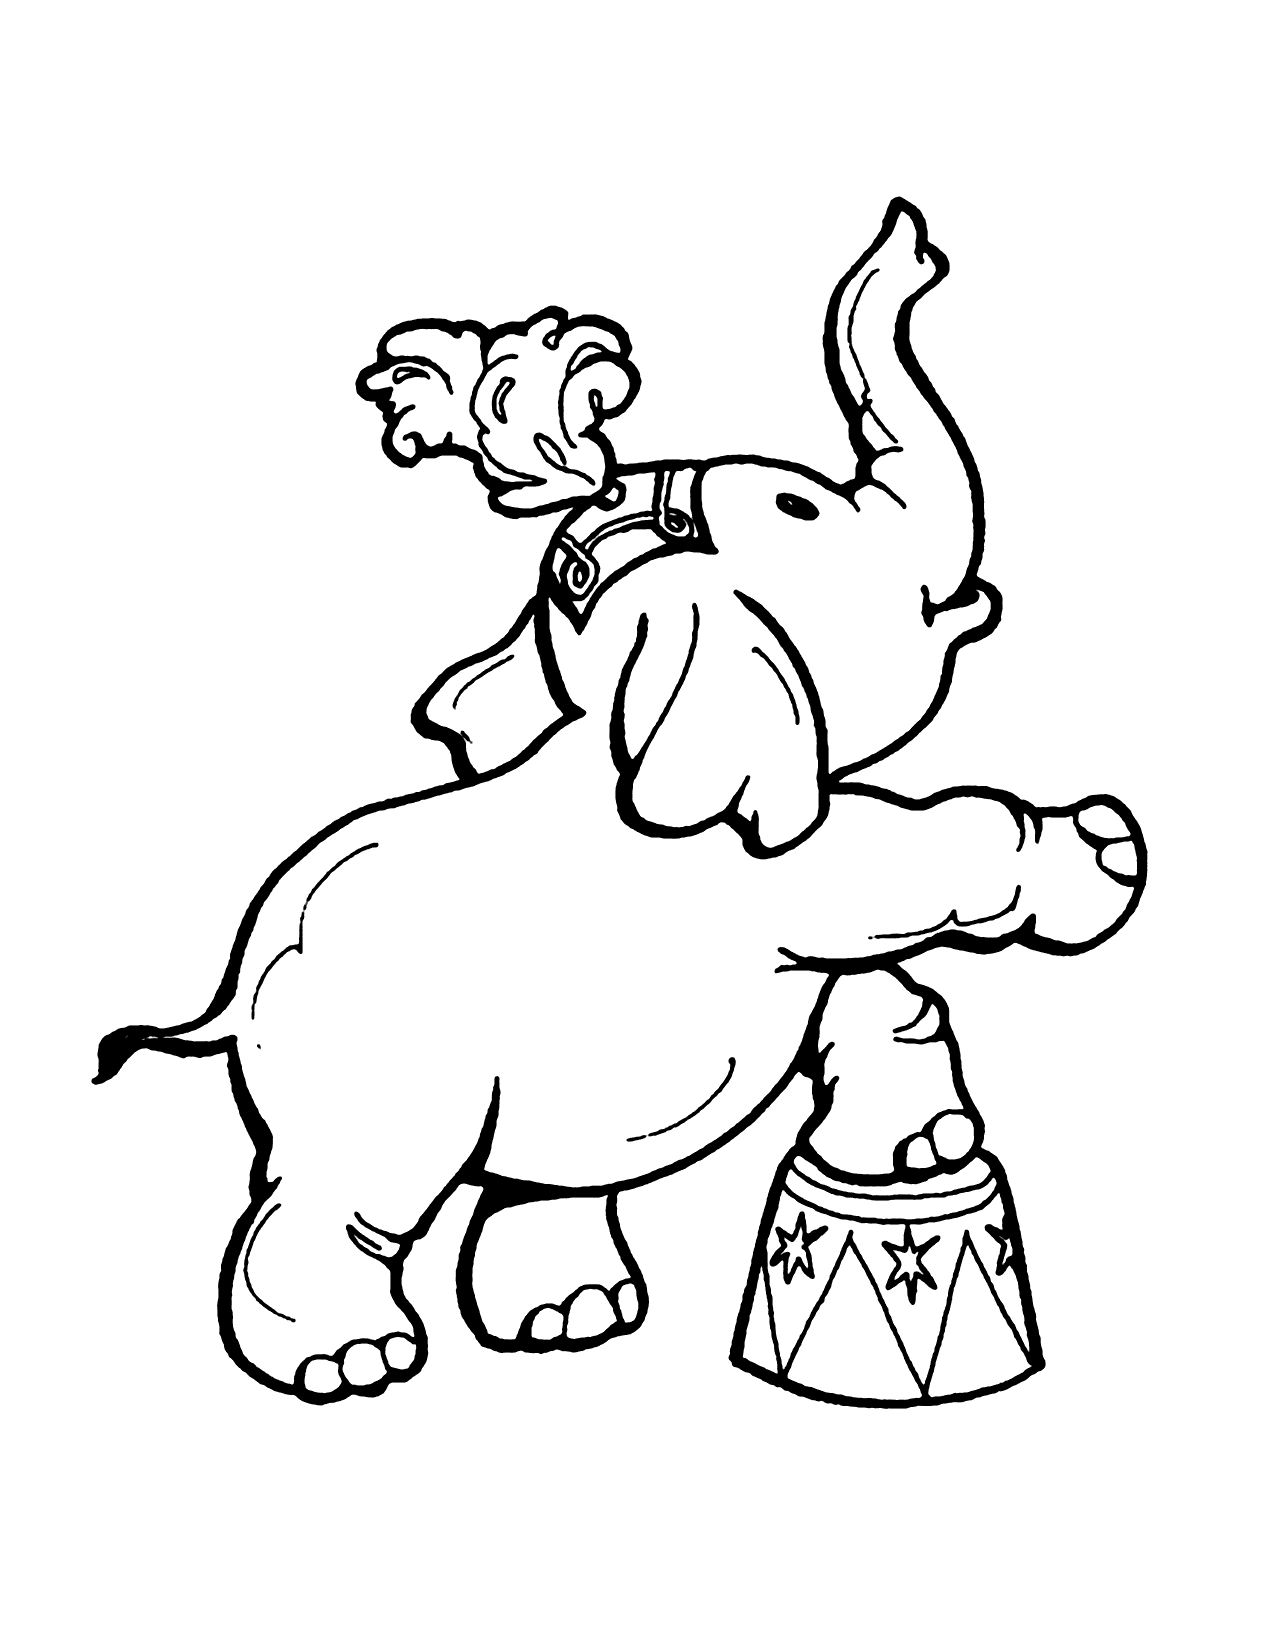 Circus Elephant Coloring Pages